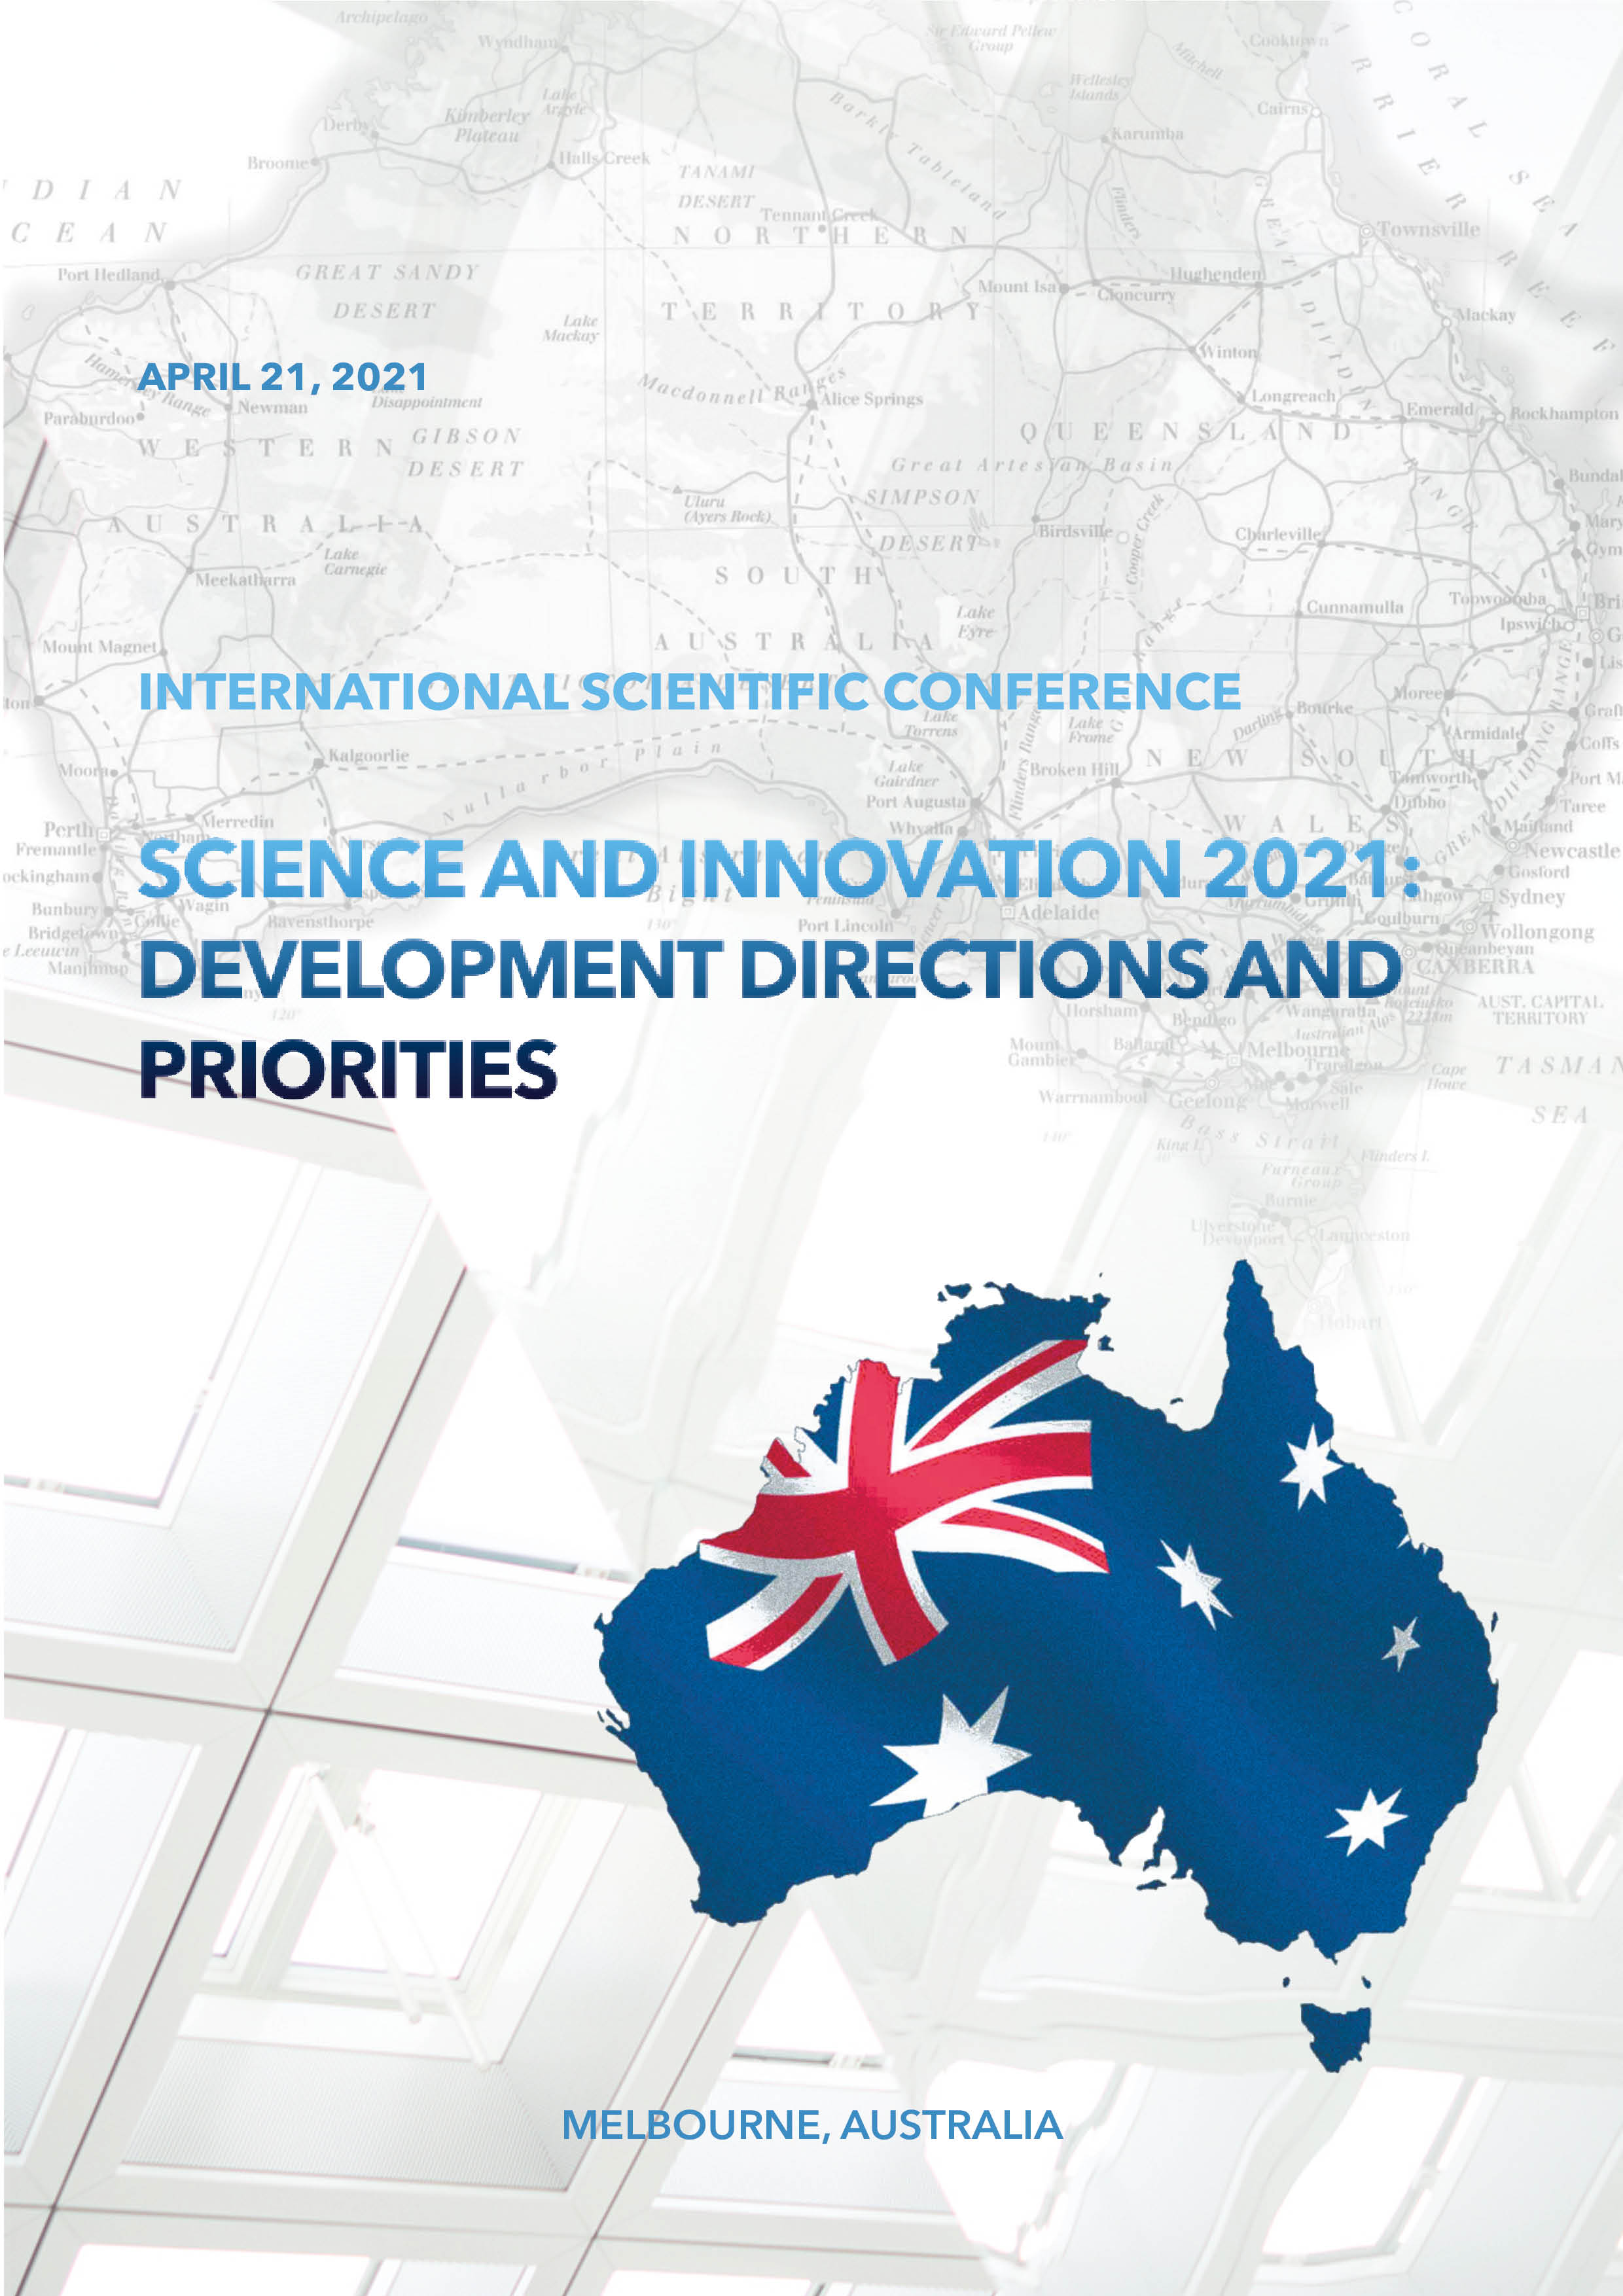                         Science and innovations 2021: development directions and priorities. PART 1
            